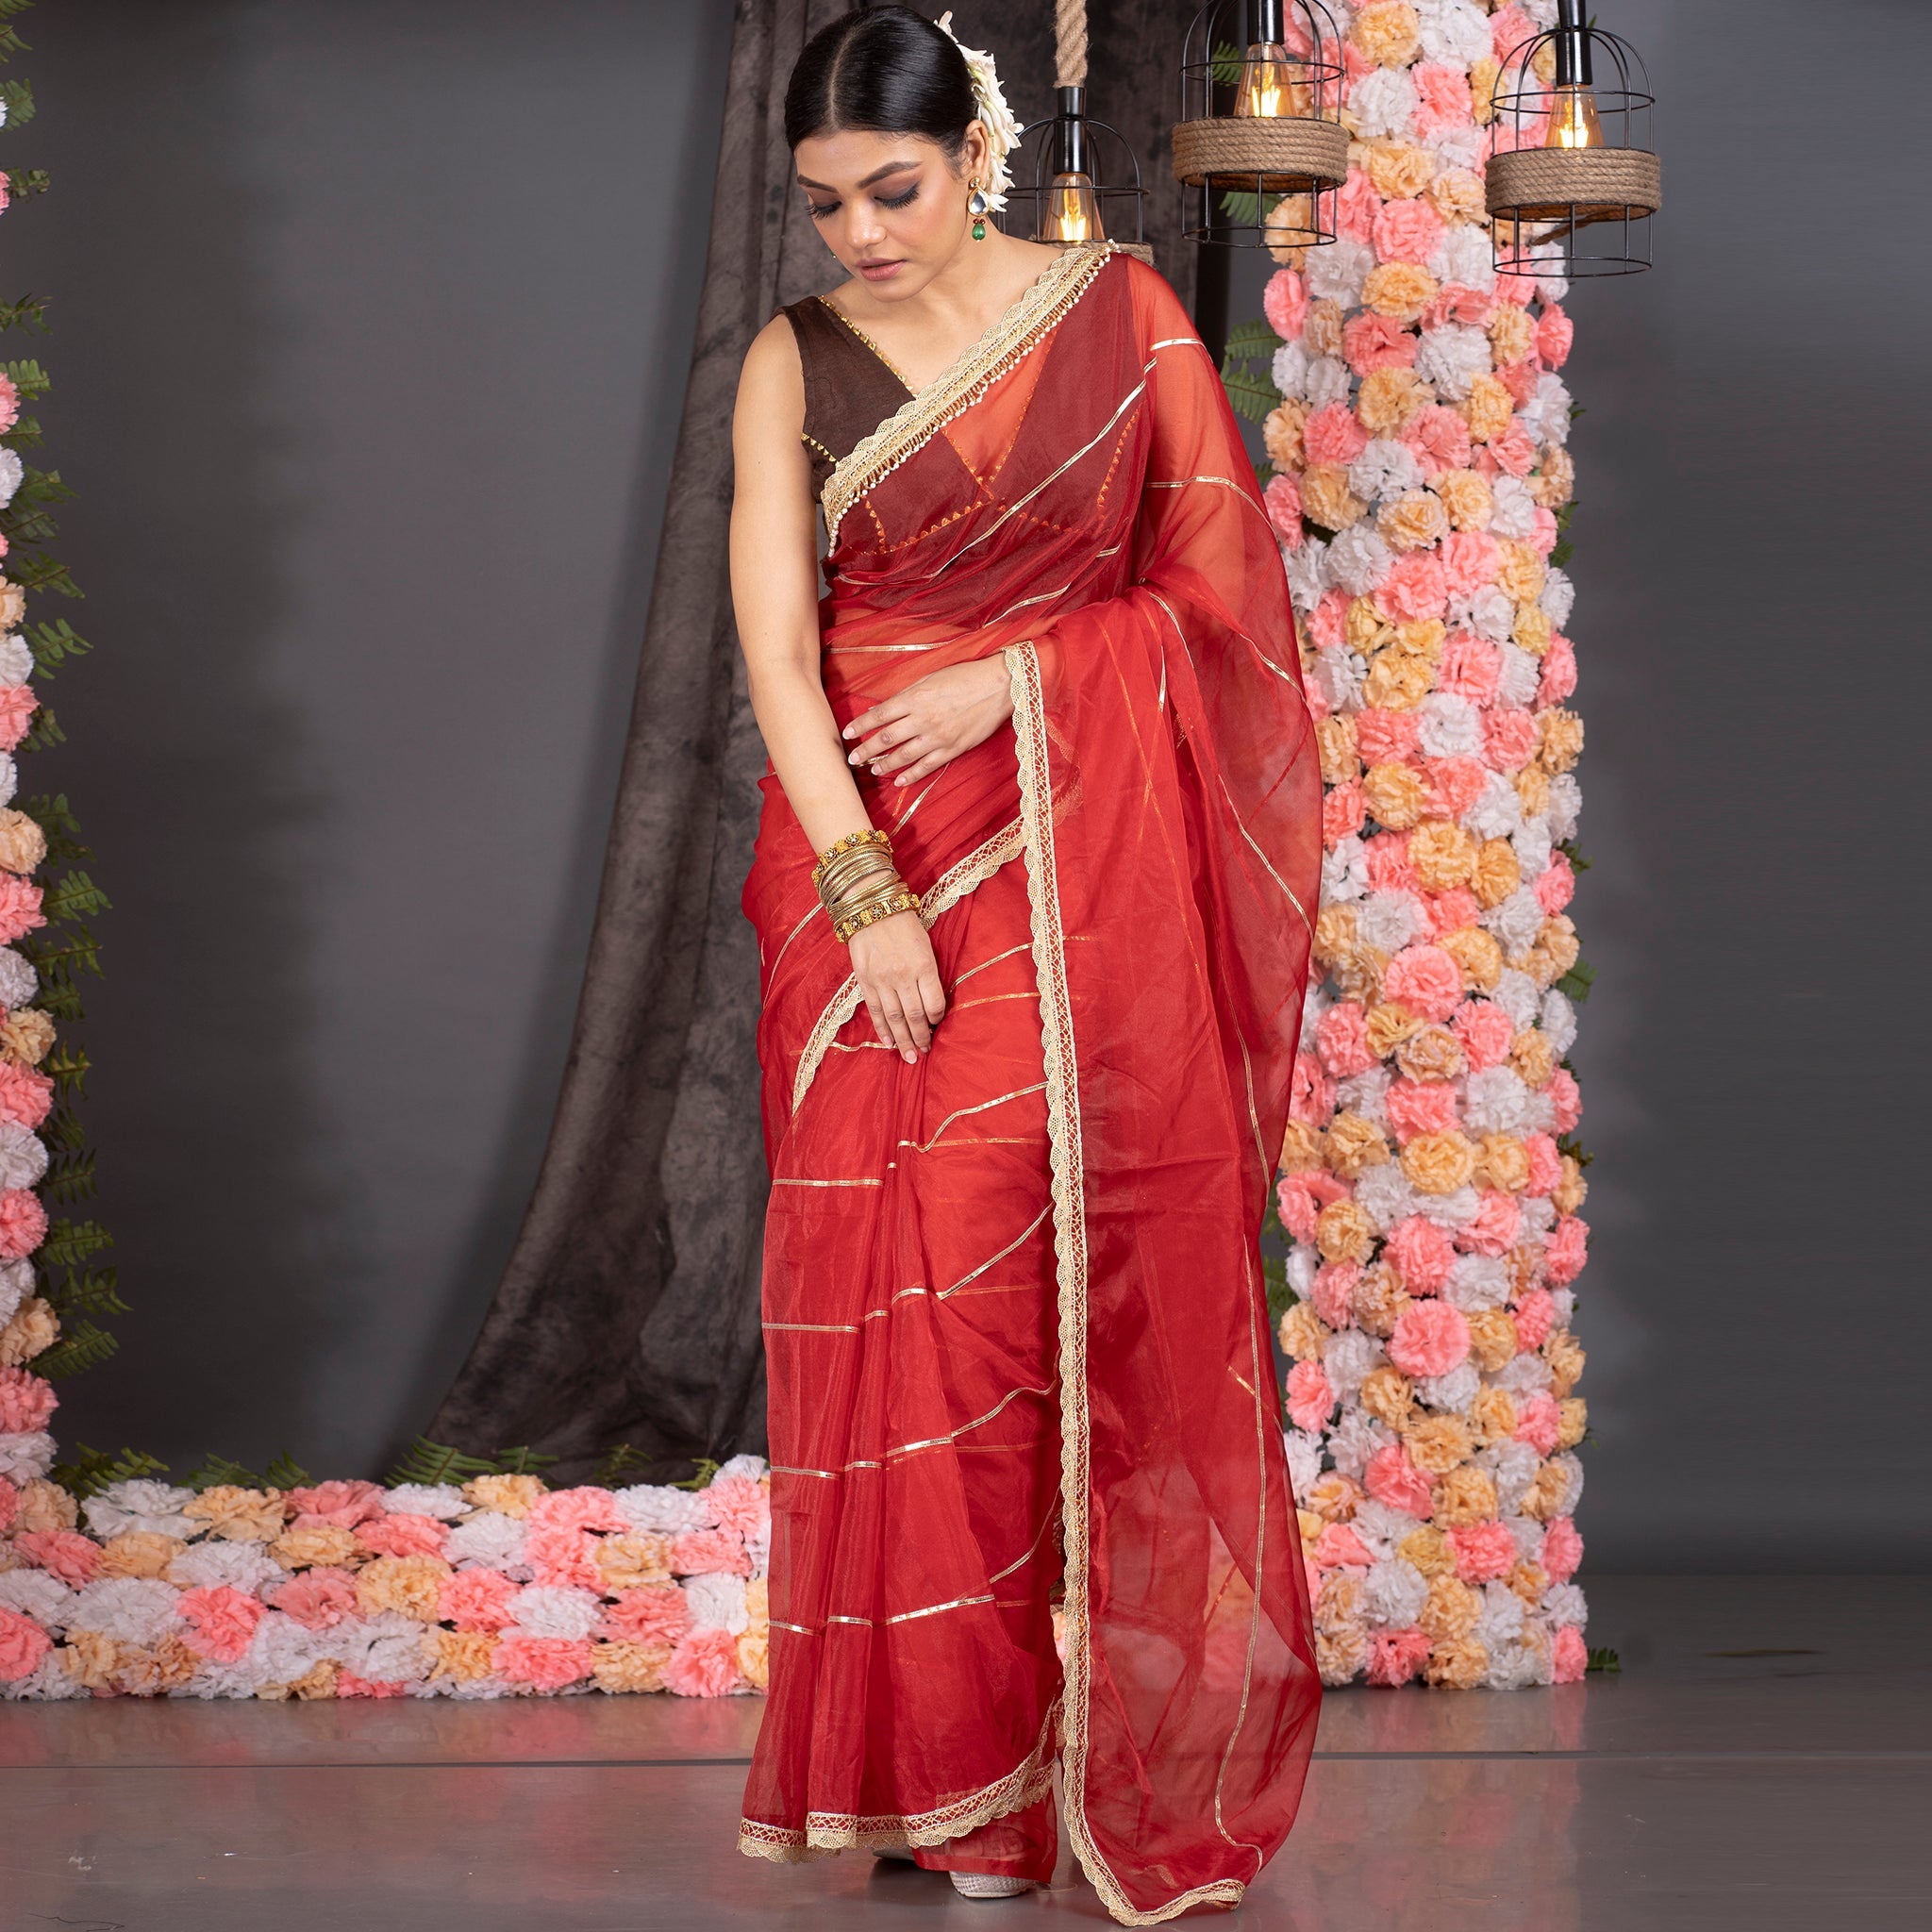 Women's Red Organza Saree With Gota Work And Scallop Border - Boveee